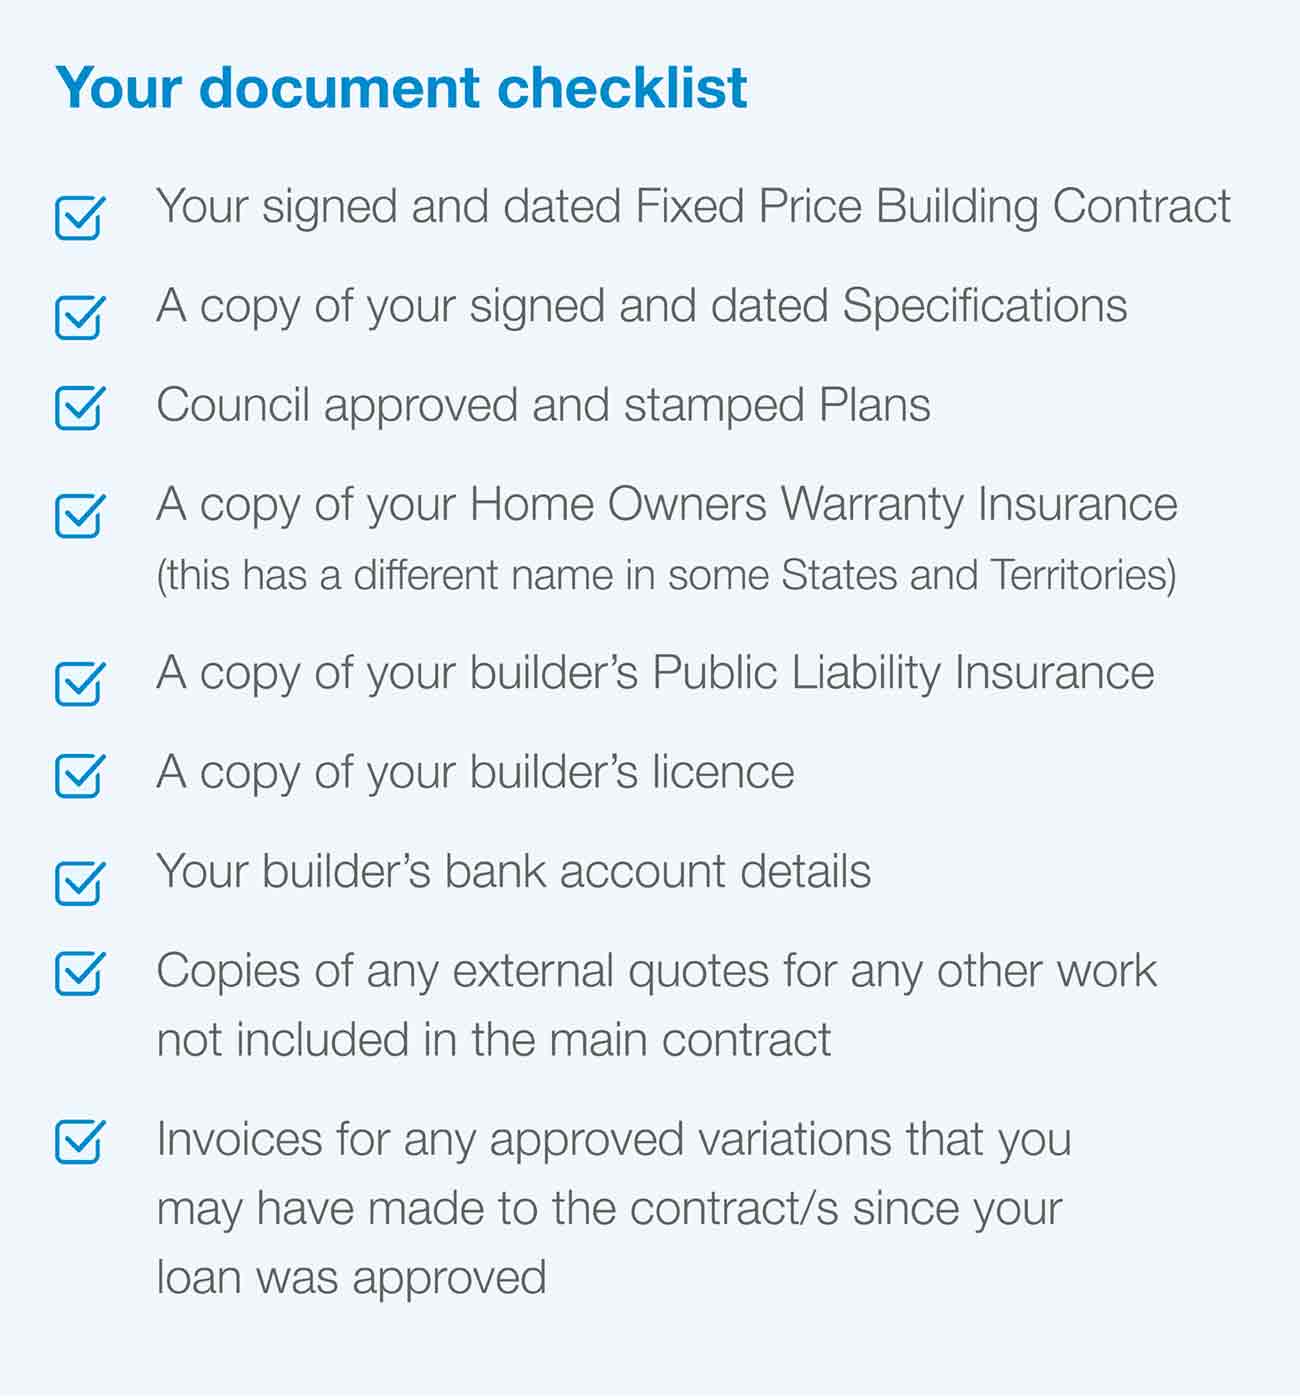 Documents for Construction-Checklist